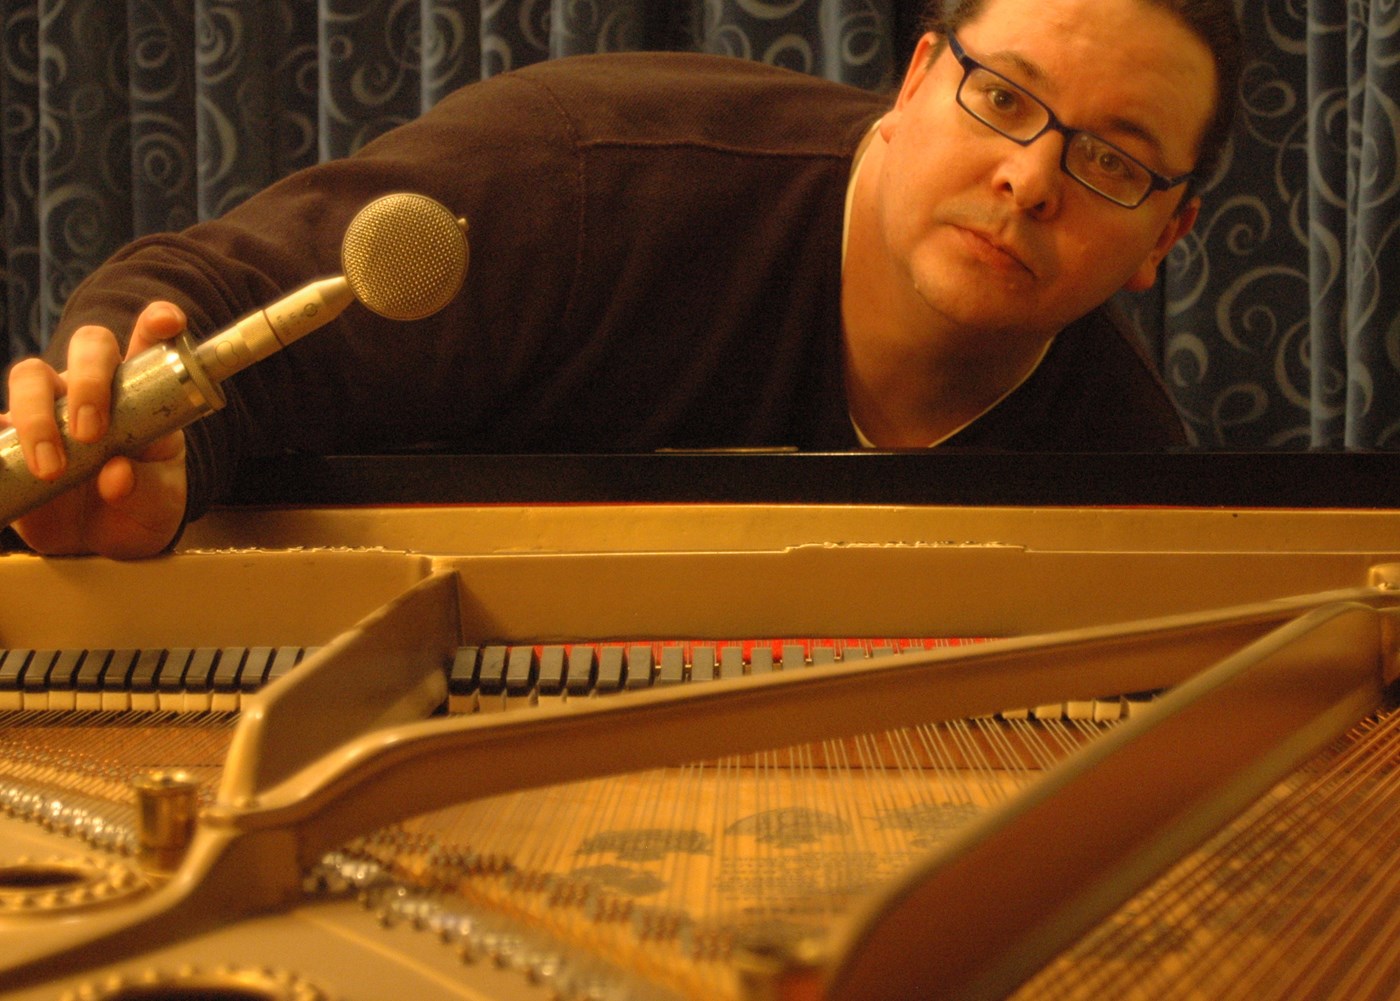 Alexander Case an Associate Professor in the Music Department at UMass Lowell. Here he poses with a microphone inside a piano.